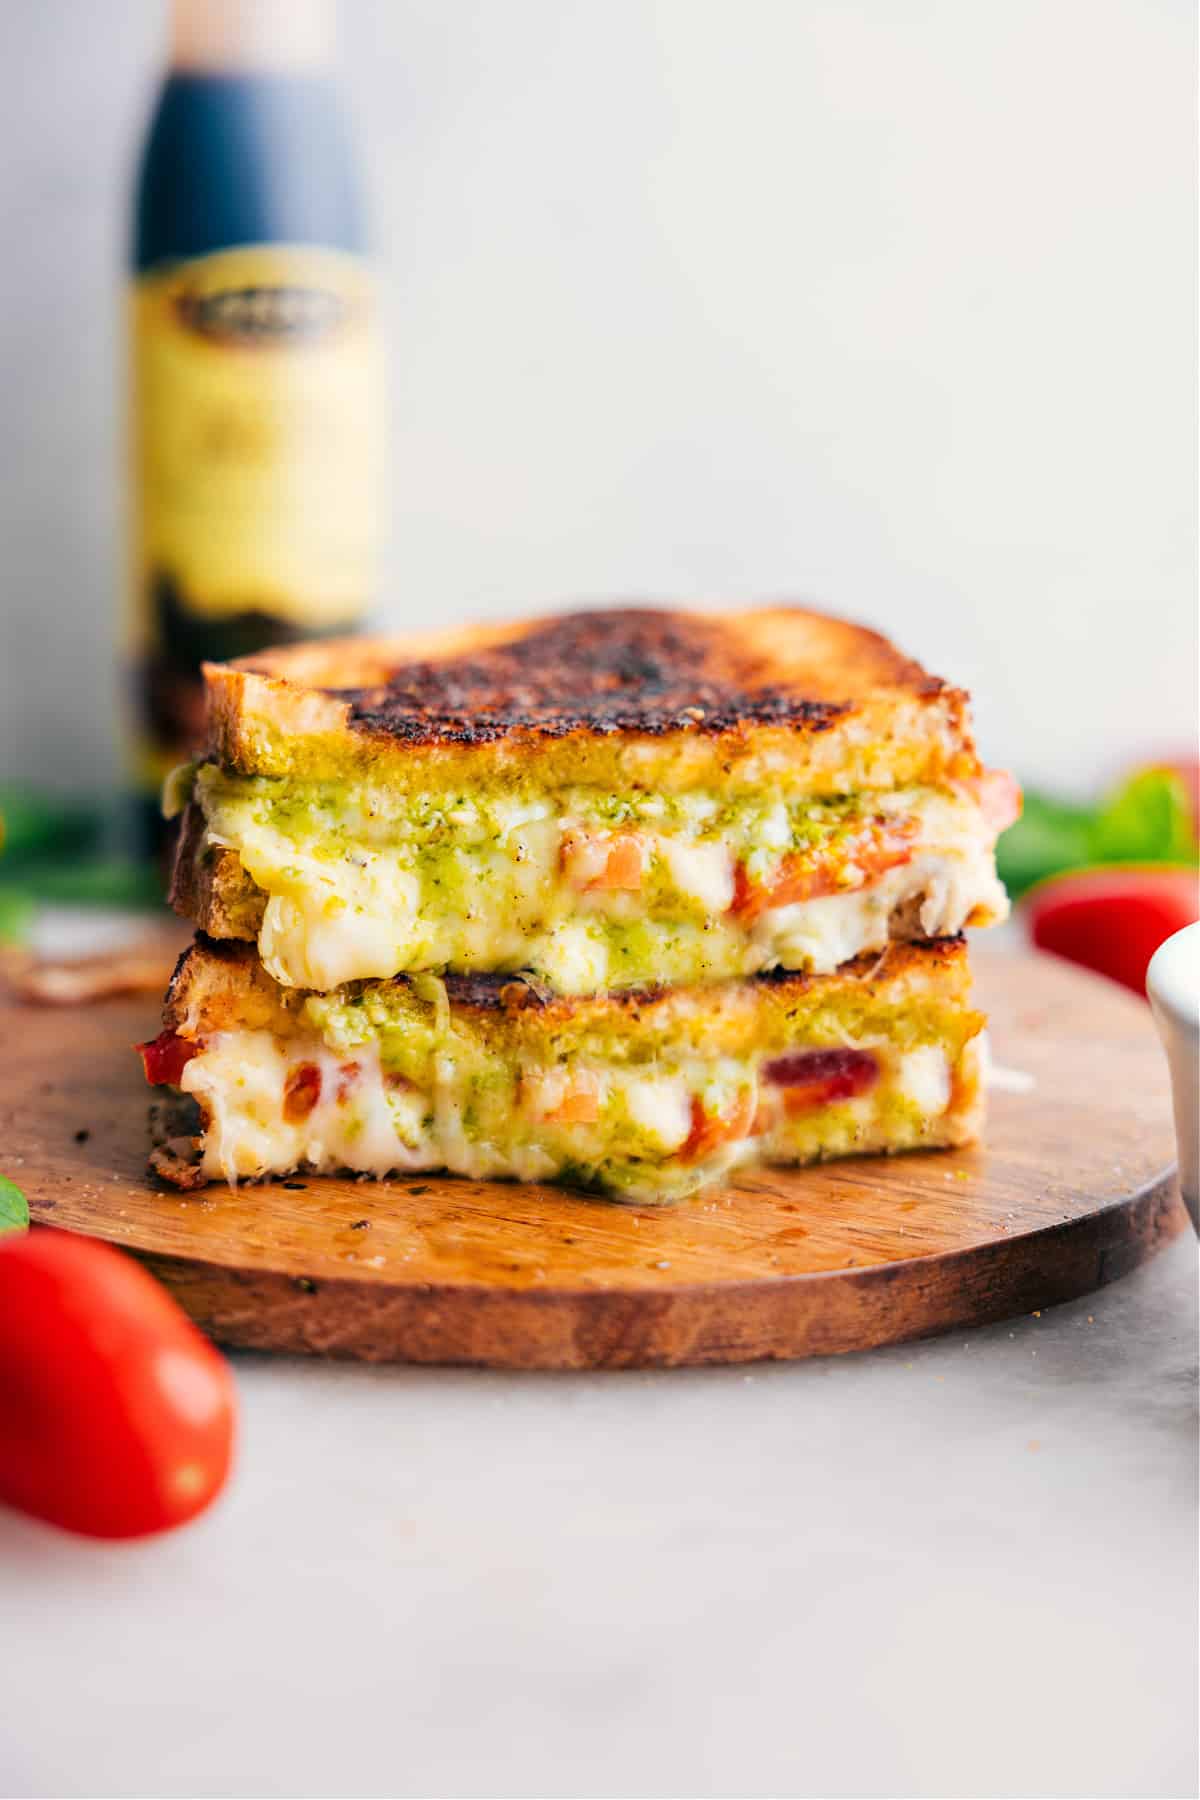 Caprese Grilled Cheese stacked on top of each other showing the cheesy center.